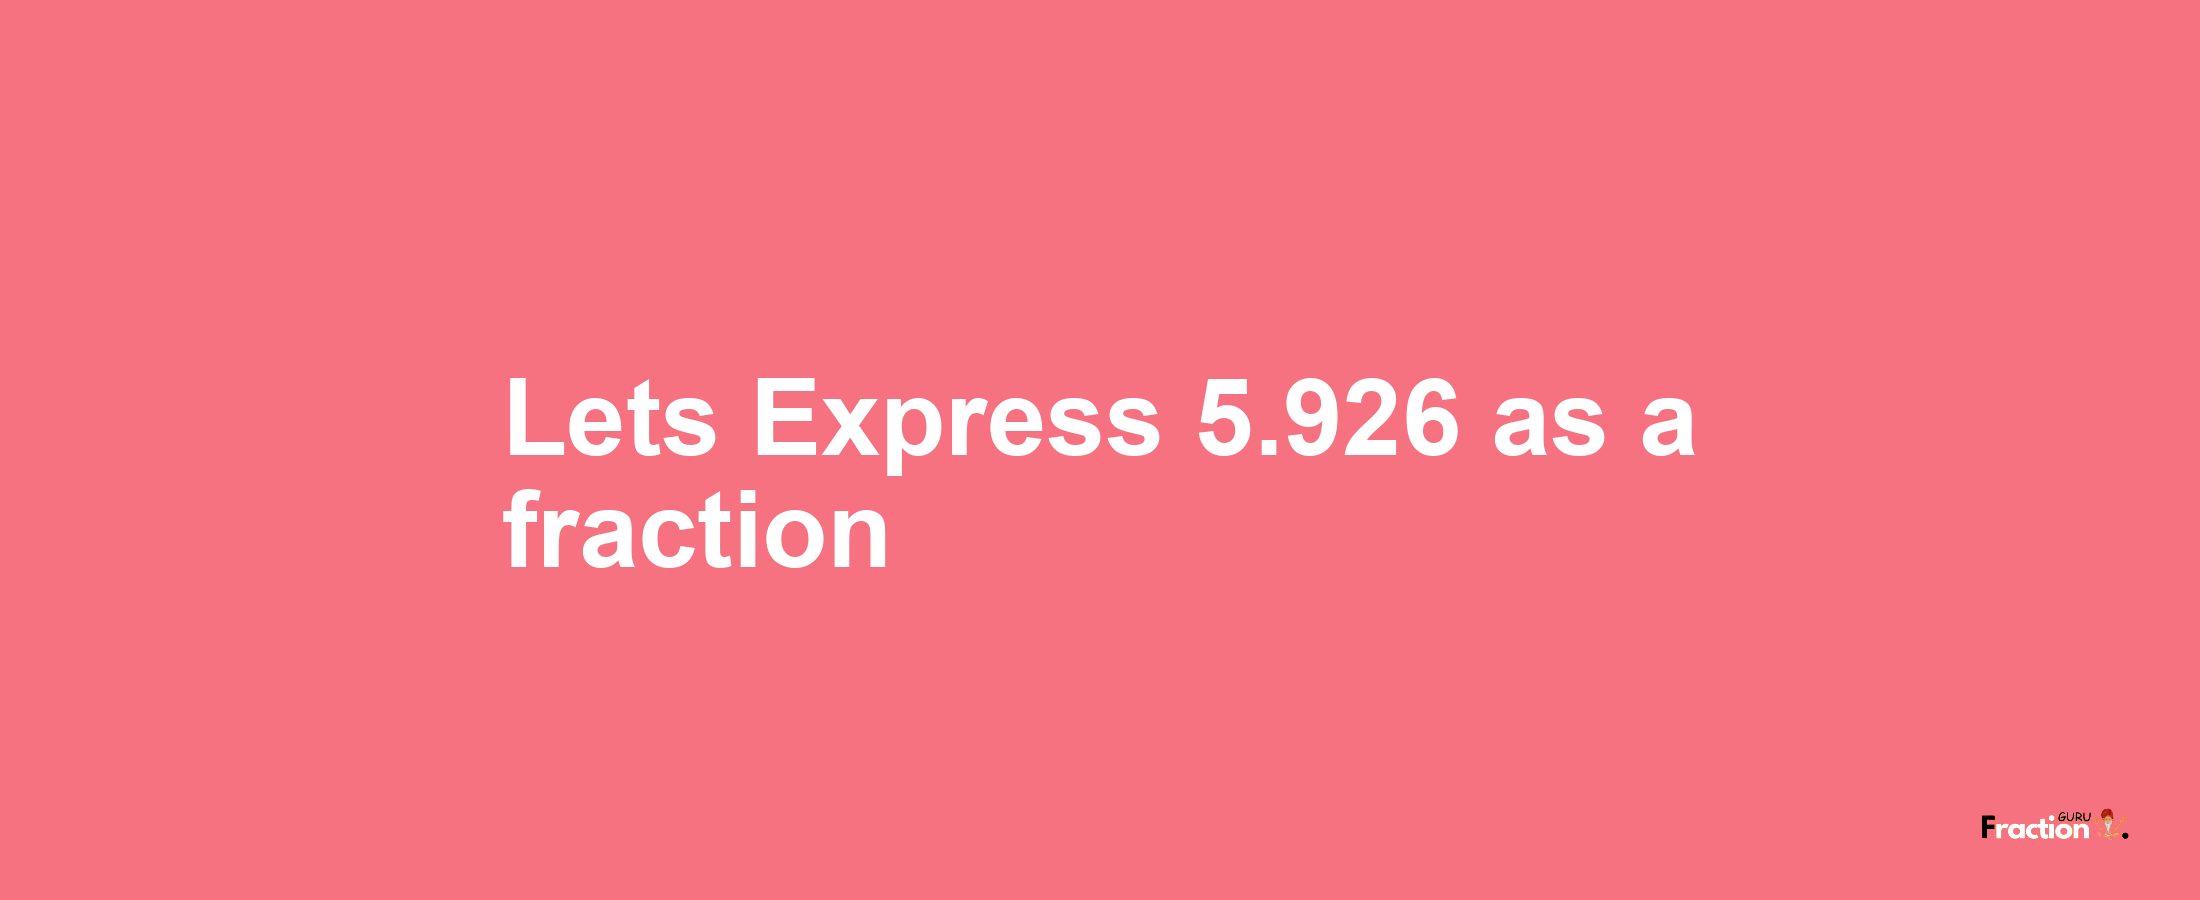 Lets Express 5.926 as afraction